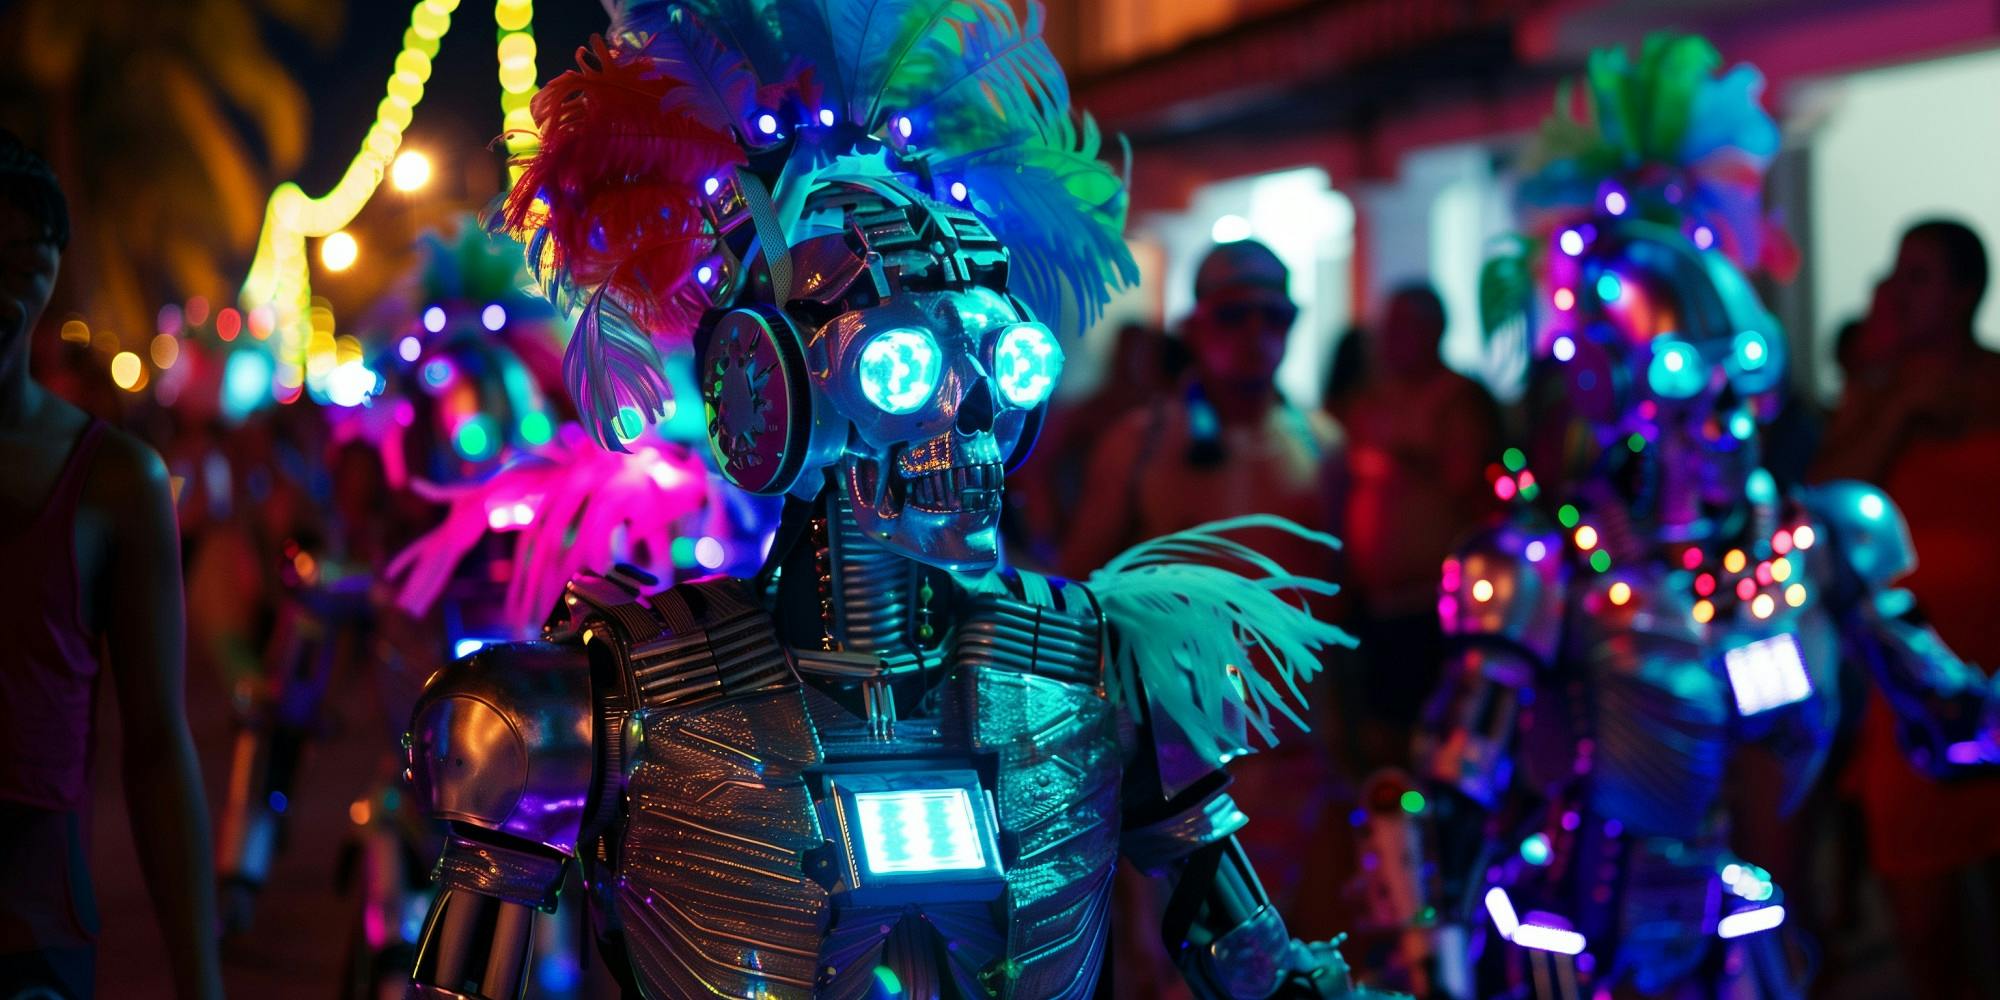 Cover Image for The Samba of the Cyborgs